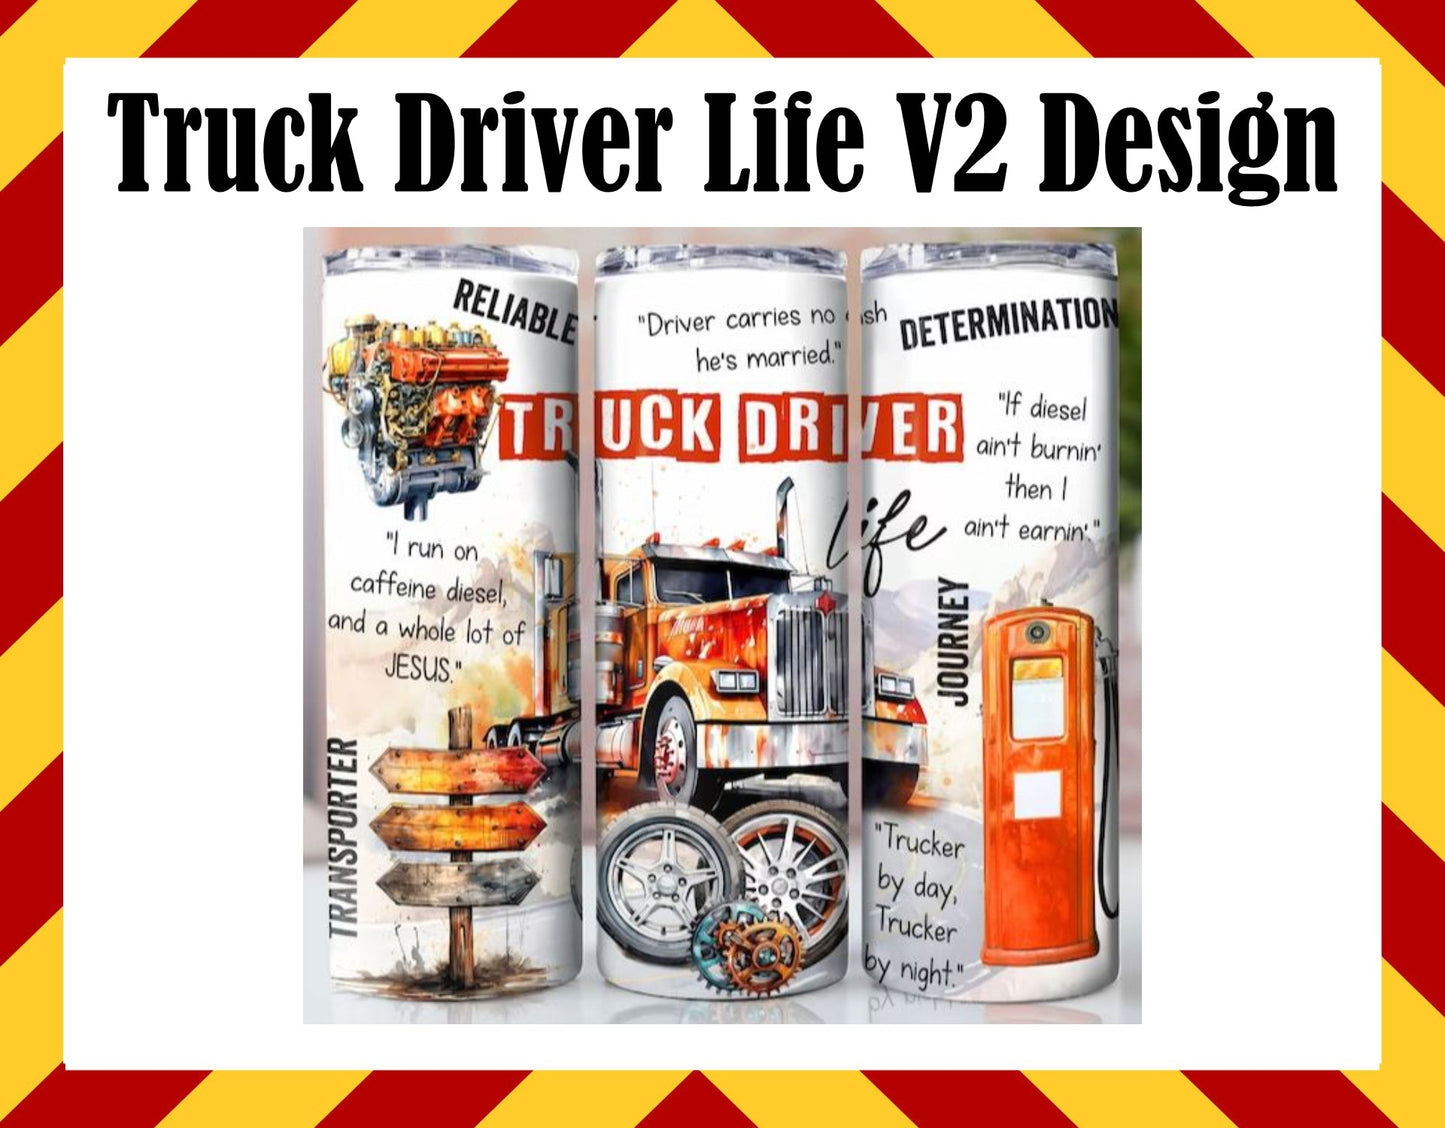 Stainless Steel Cup - Truck Driver Life V2 Design